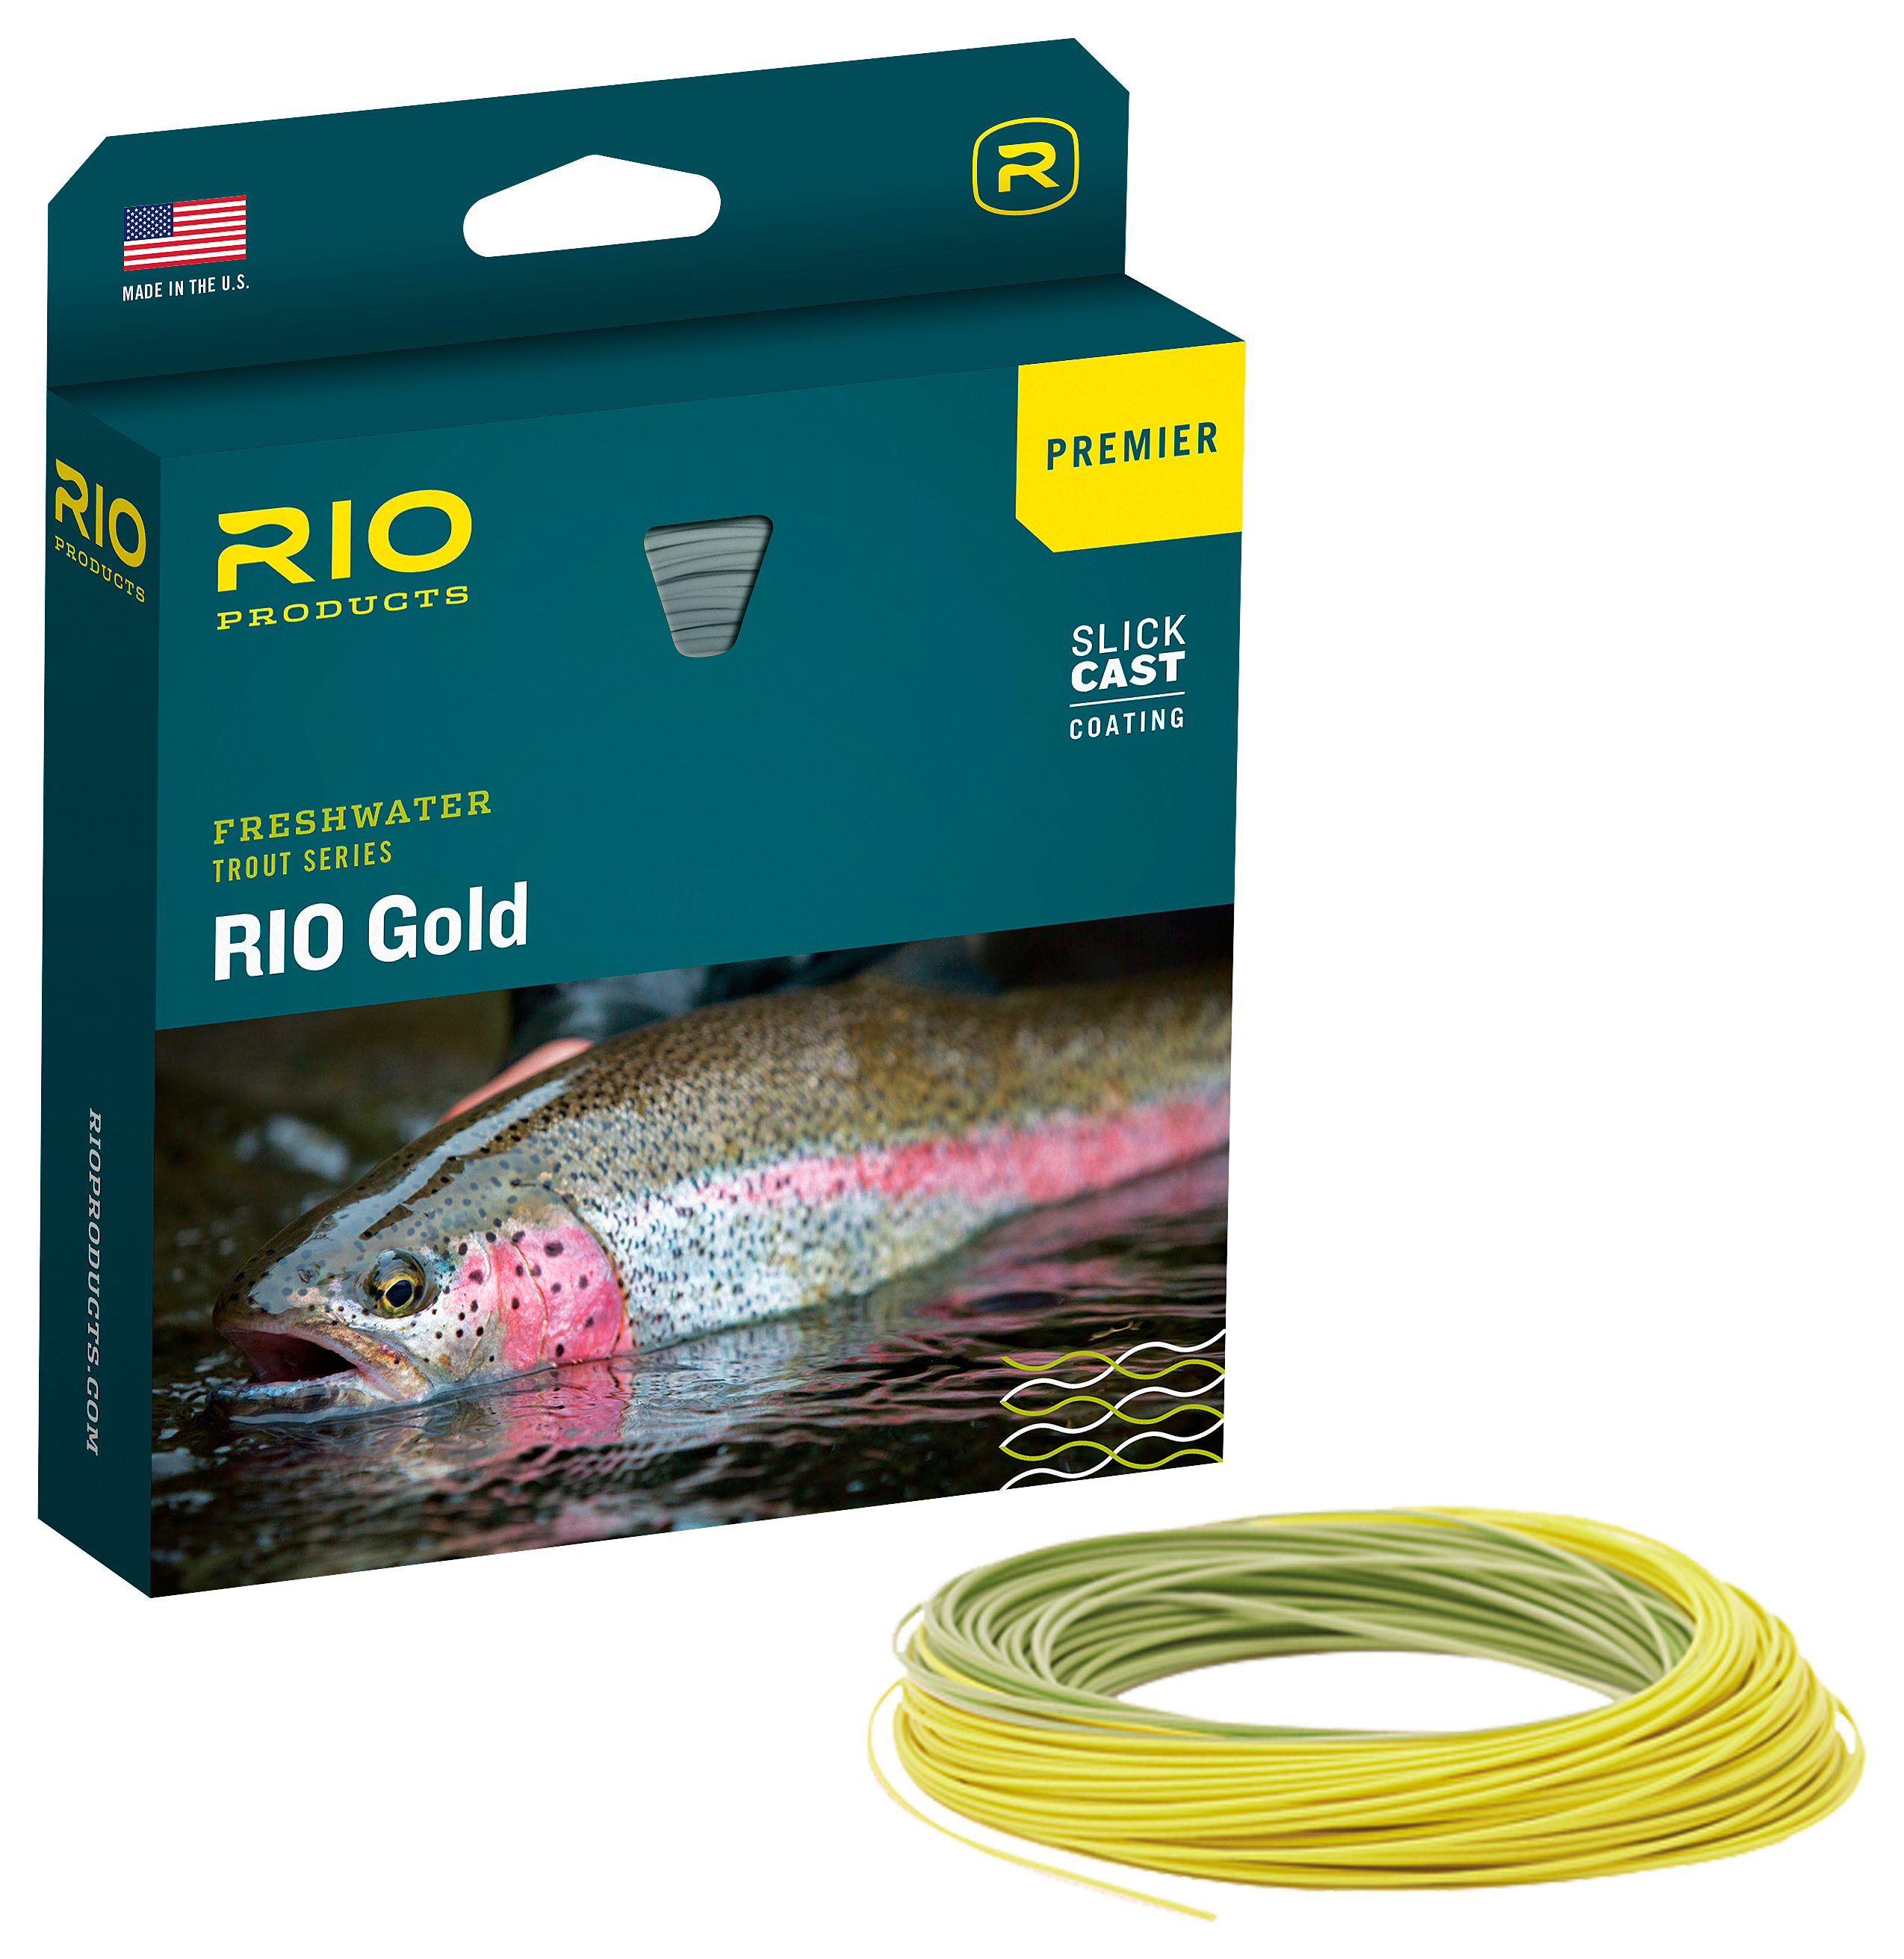 RIO Premier RIO Gold Fly Line - Moss/Gold - 80' - 3 Wt.